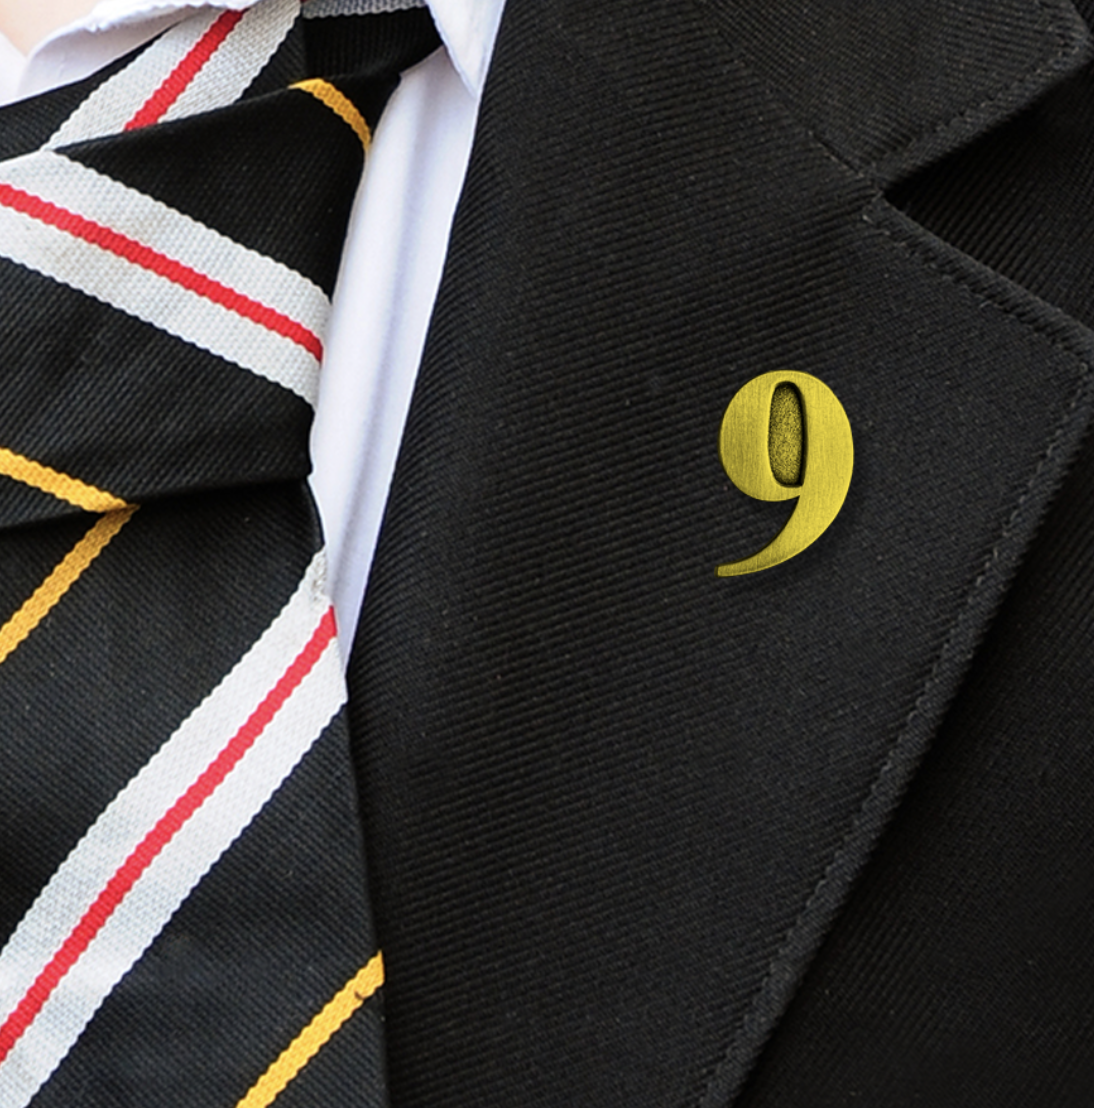 YEAR 9 BADGE IN GOLD